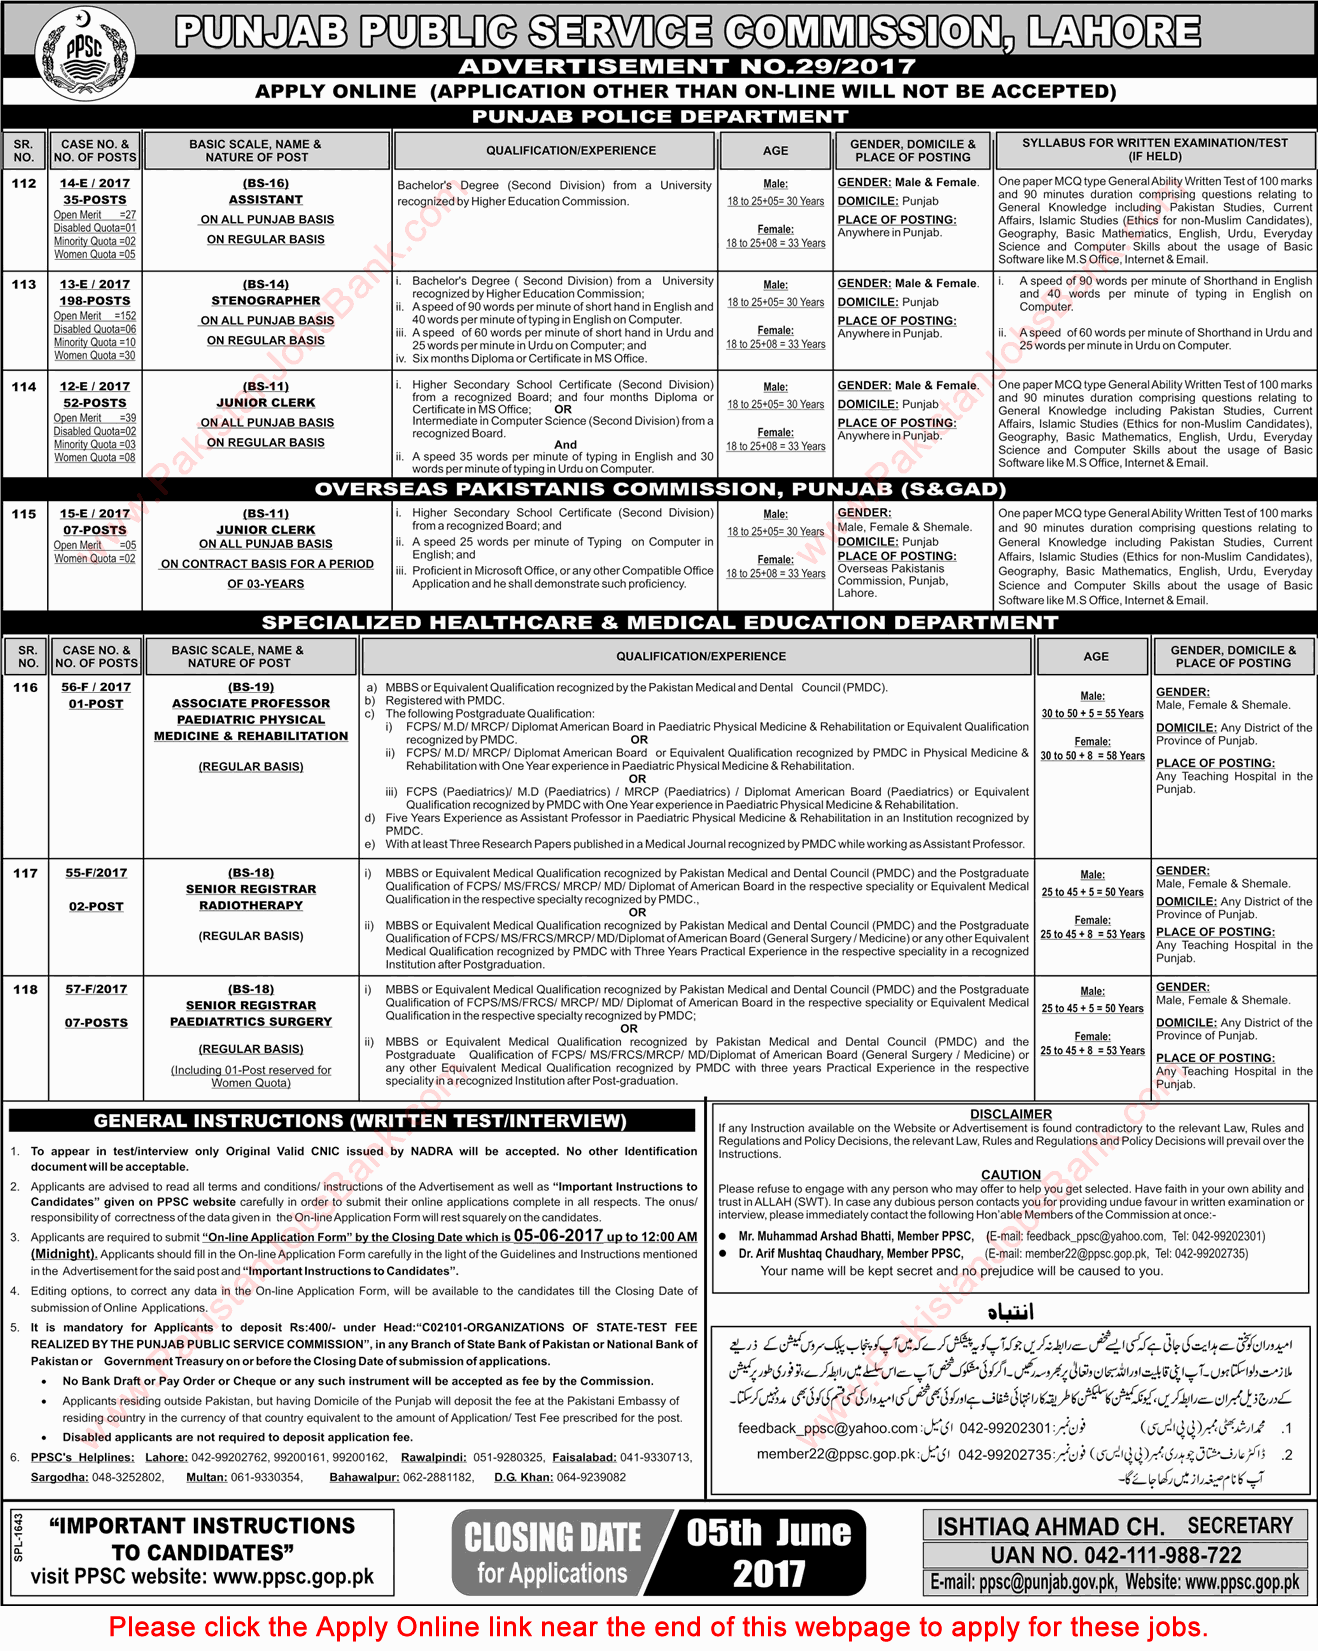 PPSC Jobs May 2017 Apply Online Consolidated Advertisement 29/2017 Latest